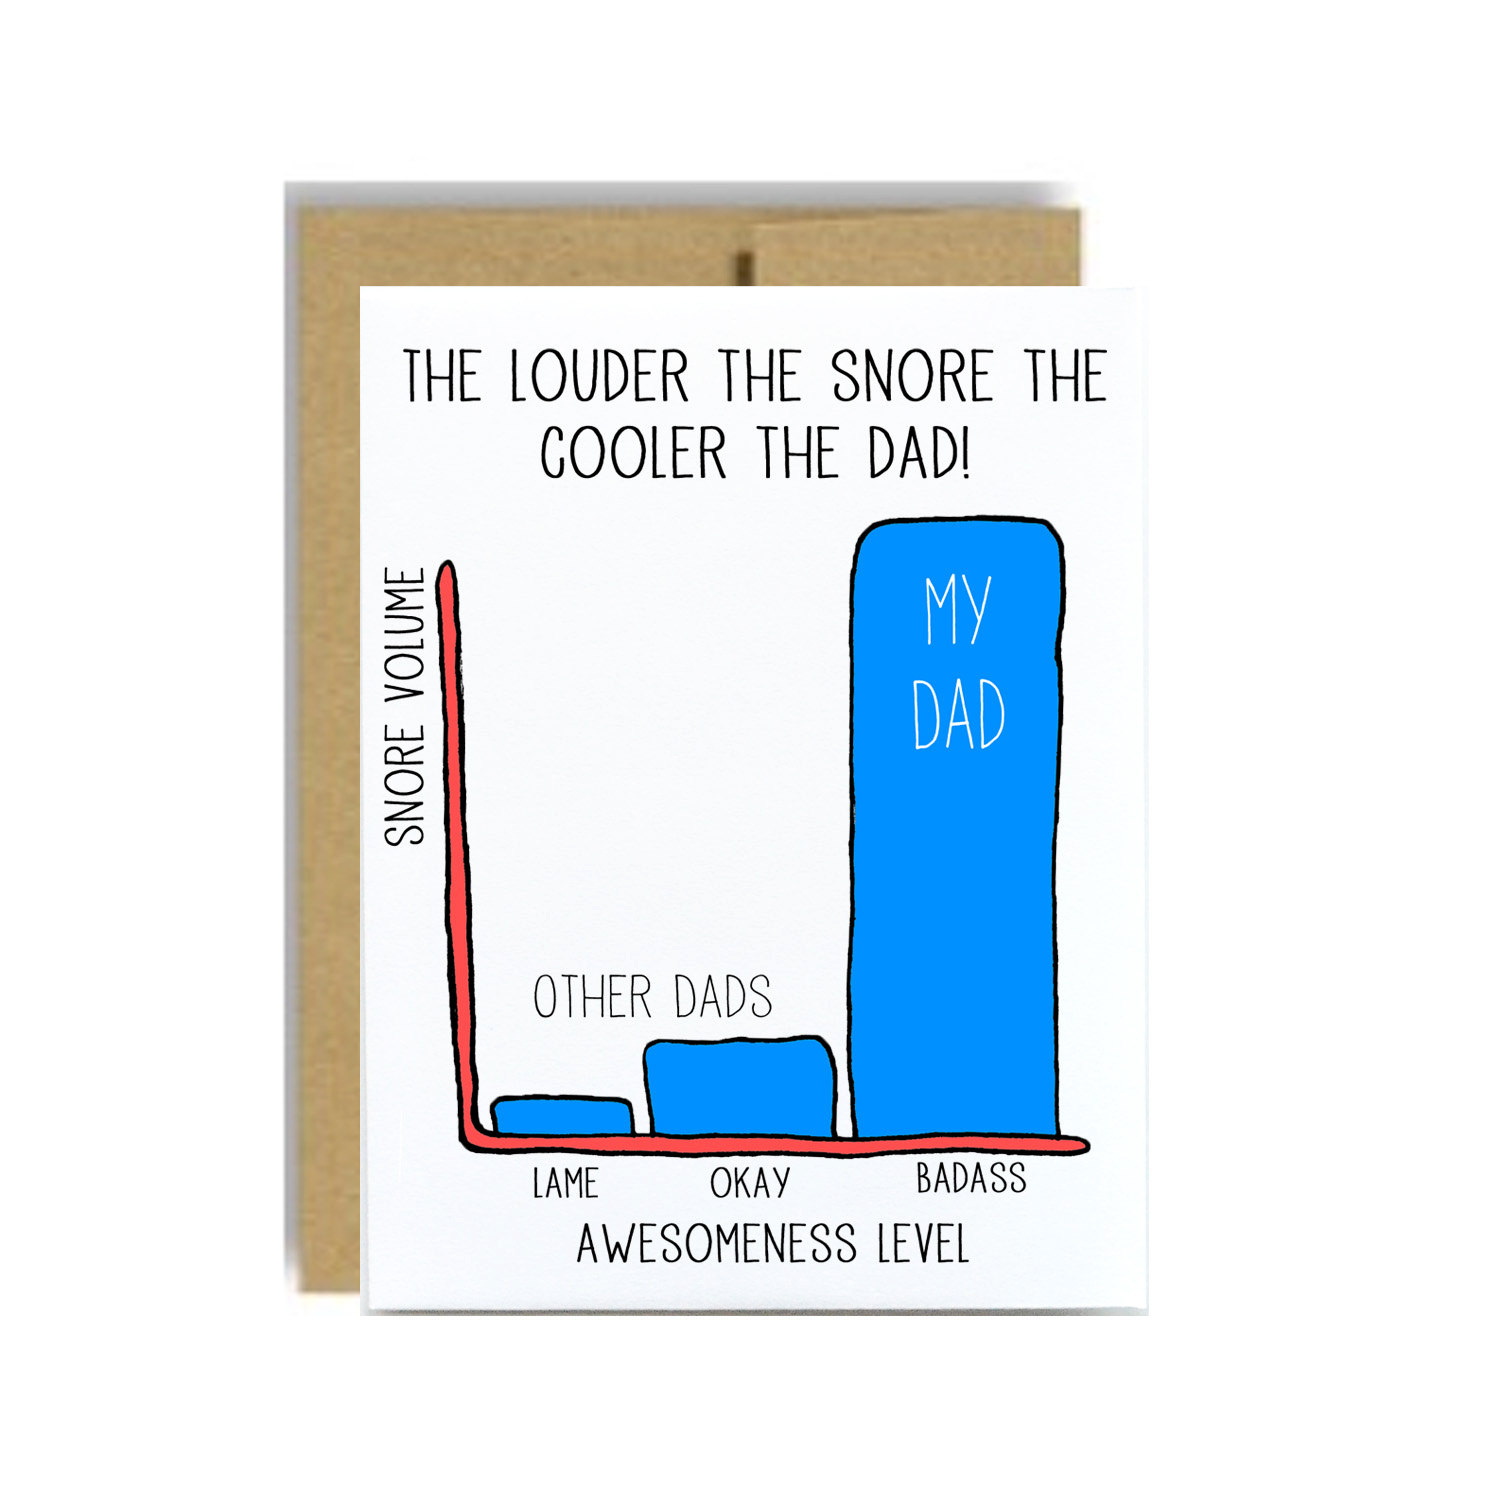 Funny Birthday Card Ideas For Dad 100 Cool Birthday Cards For Dad Funny Birthday Card For Dad Him